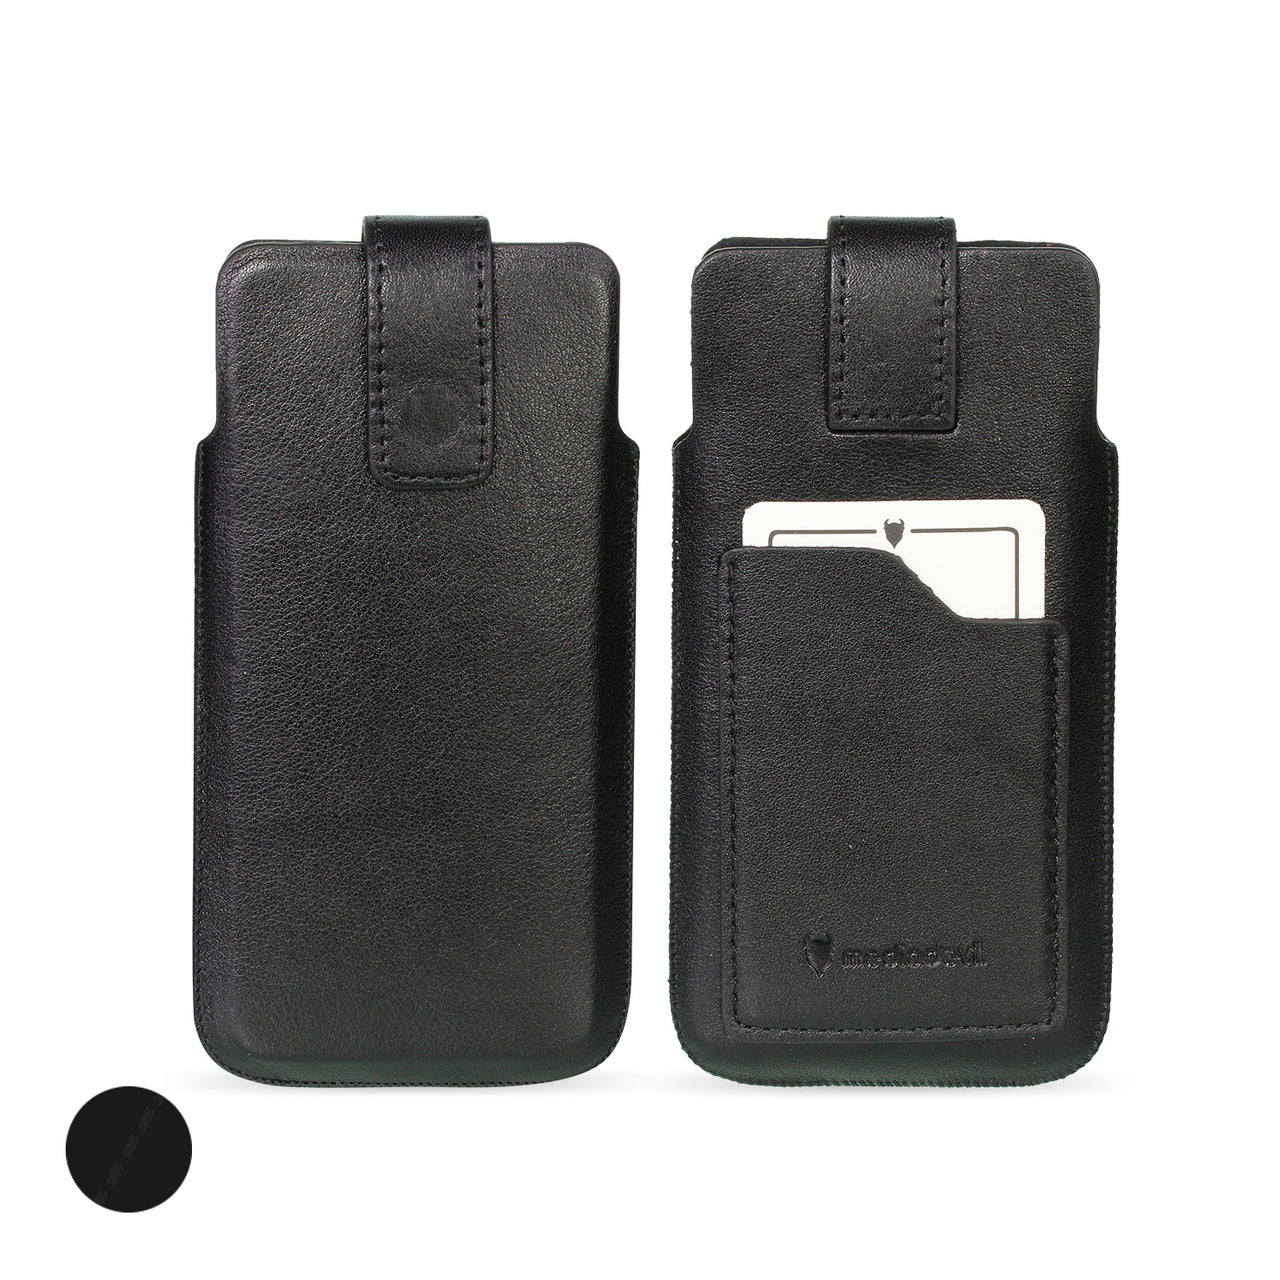 Genuine Leather Pouch Phone Case - Universal Size 5 (XL)